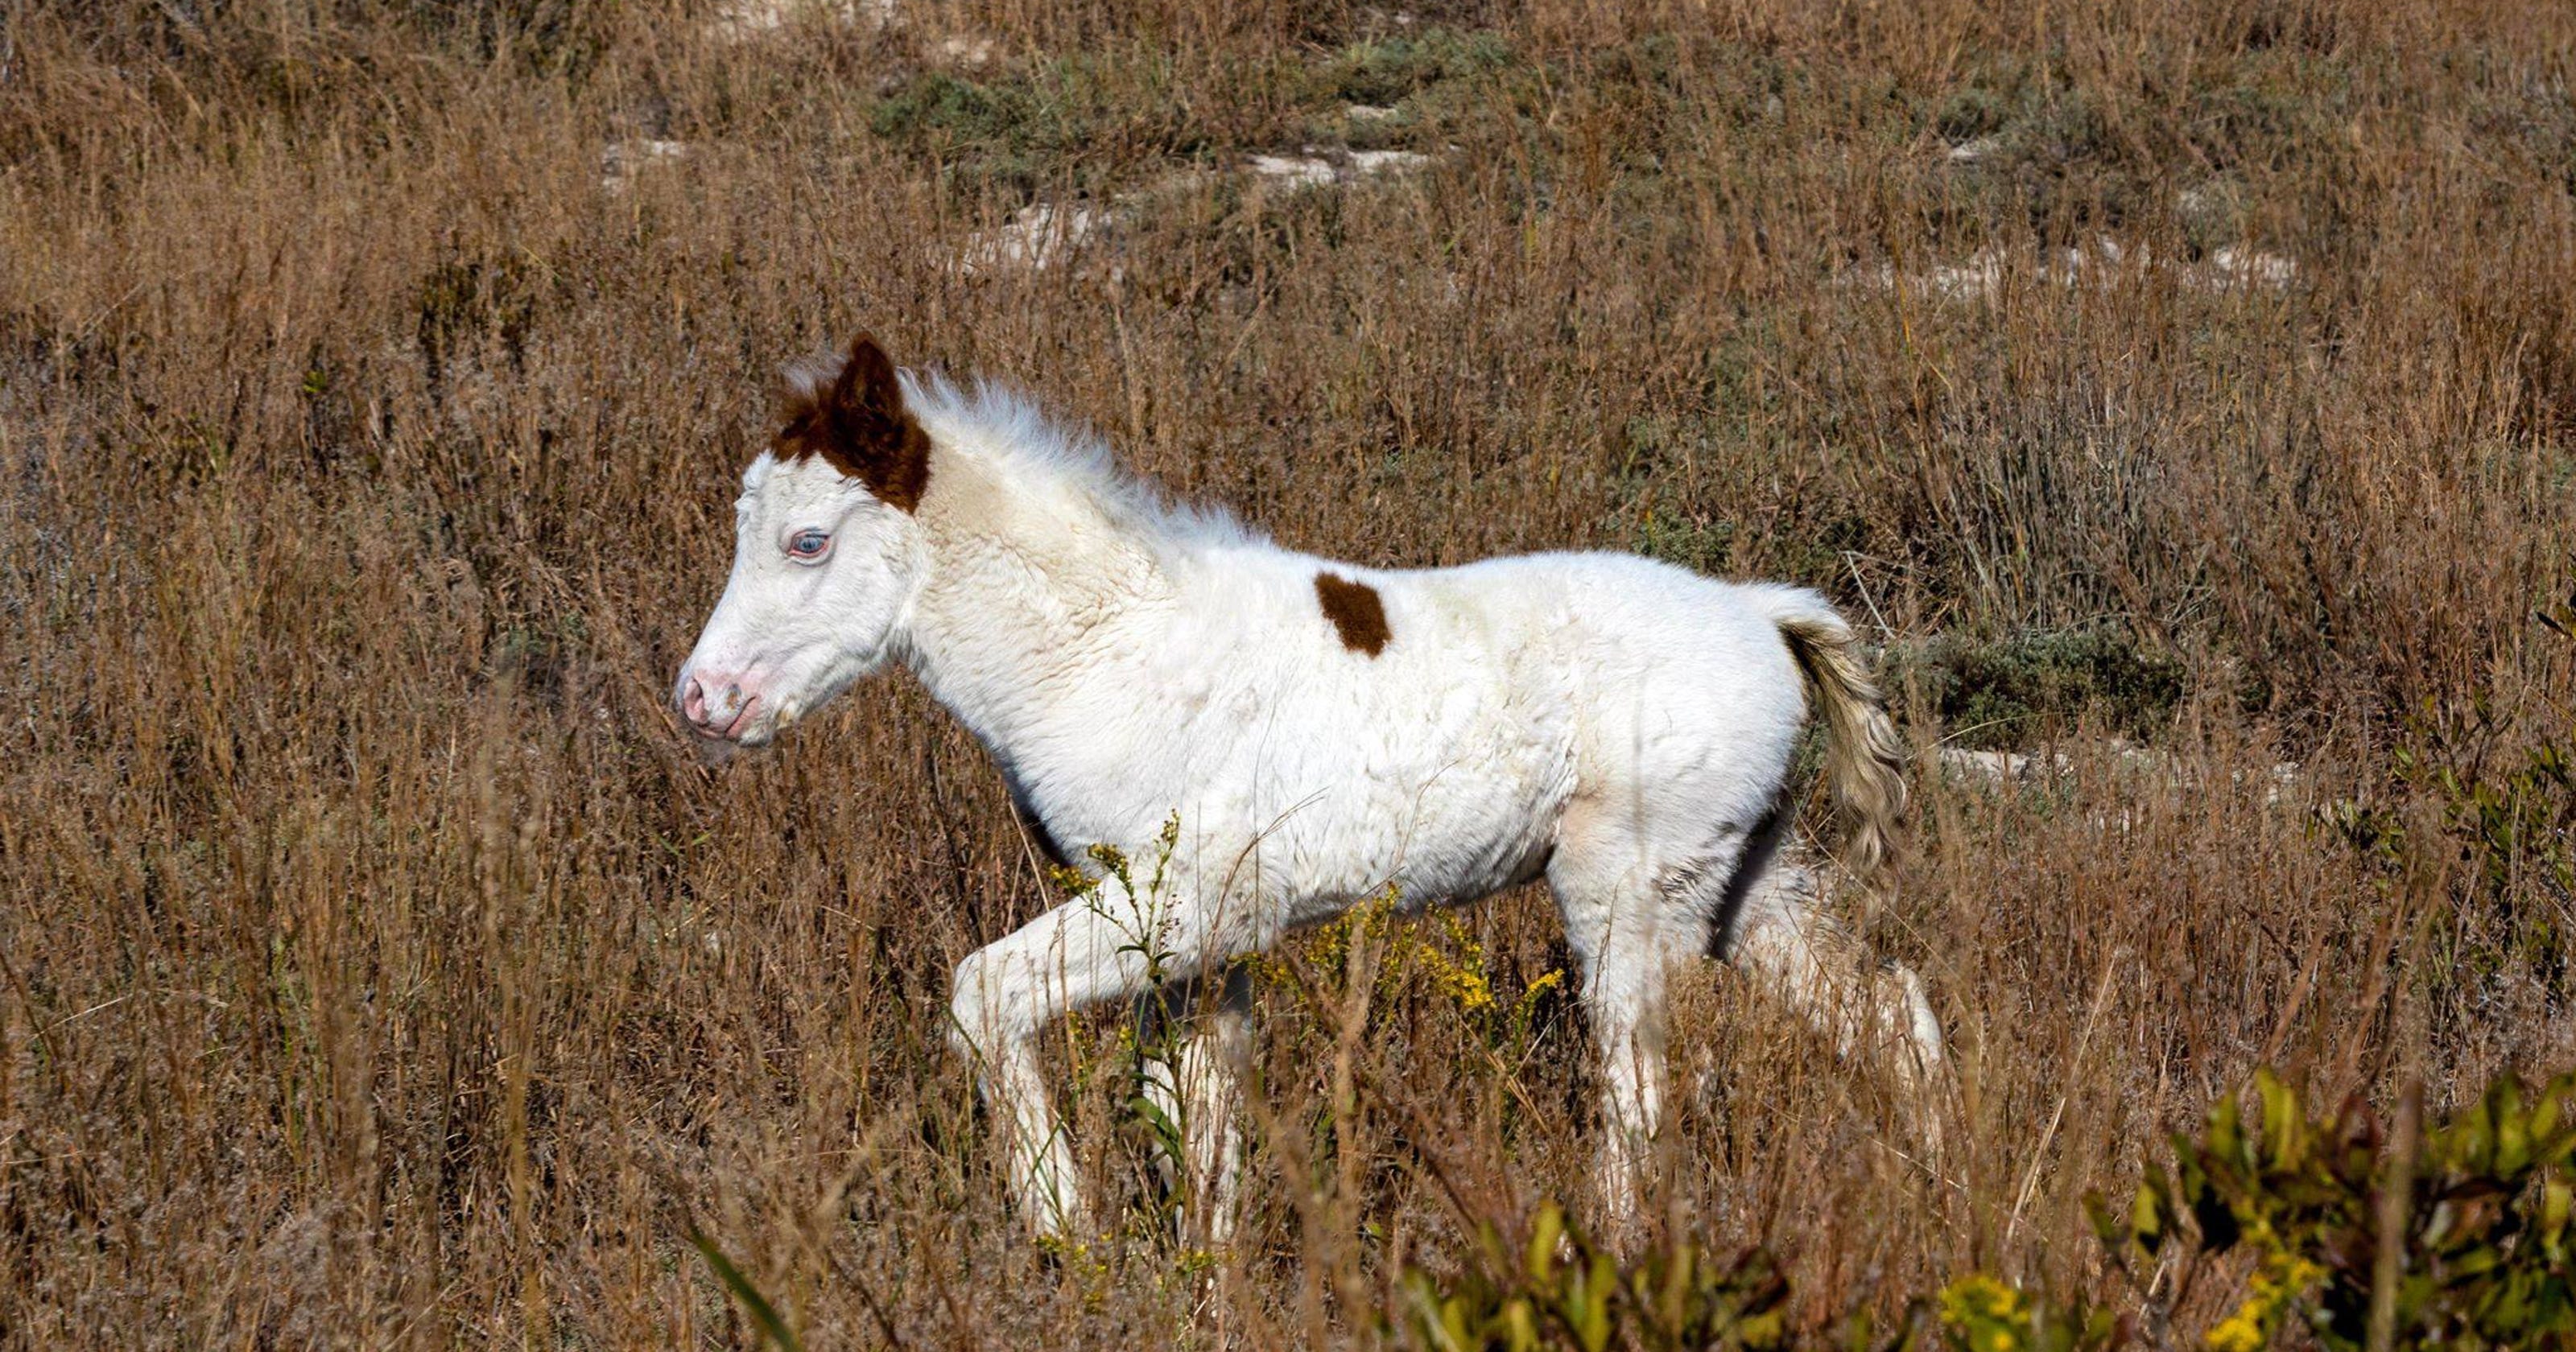 Medicine hat foal one of four Chincoteague ponies up for auction